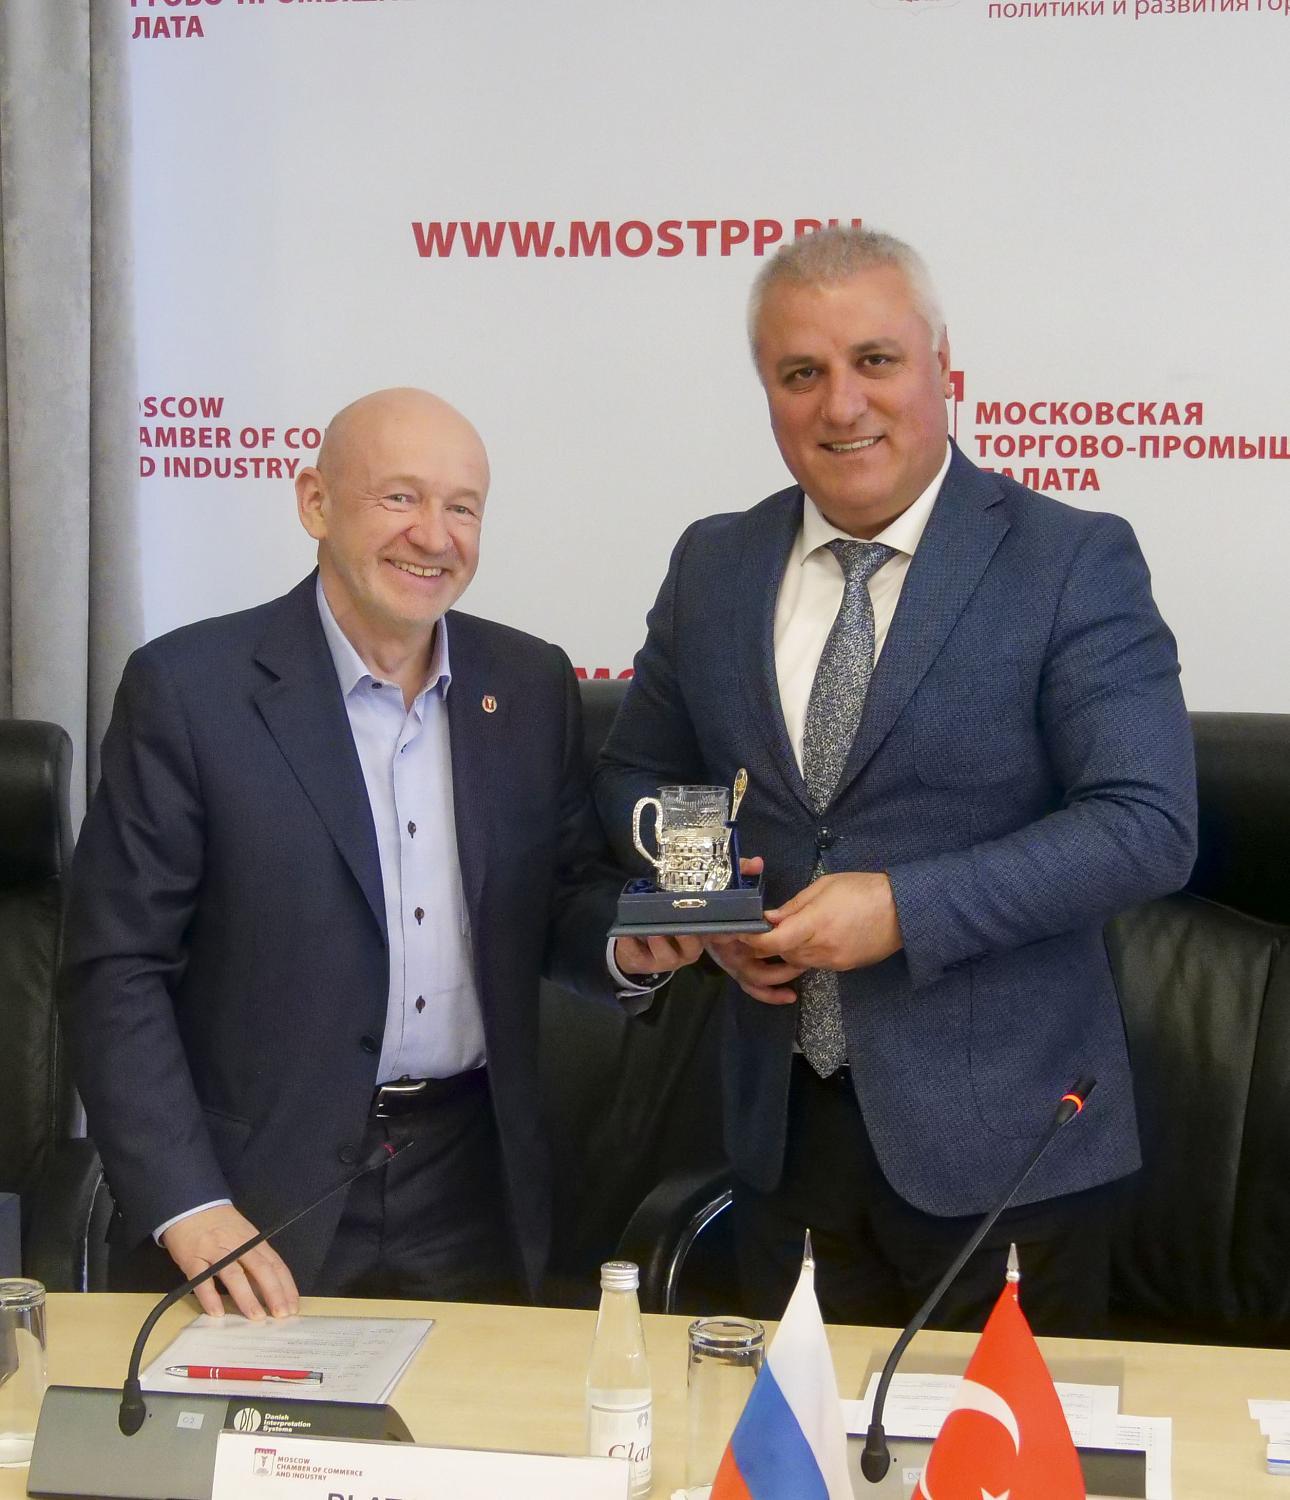 A meeting of entrepreneurs of the capital and the city of Alanya (Turkey) was held on the site of the MCCI